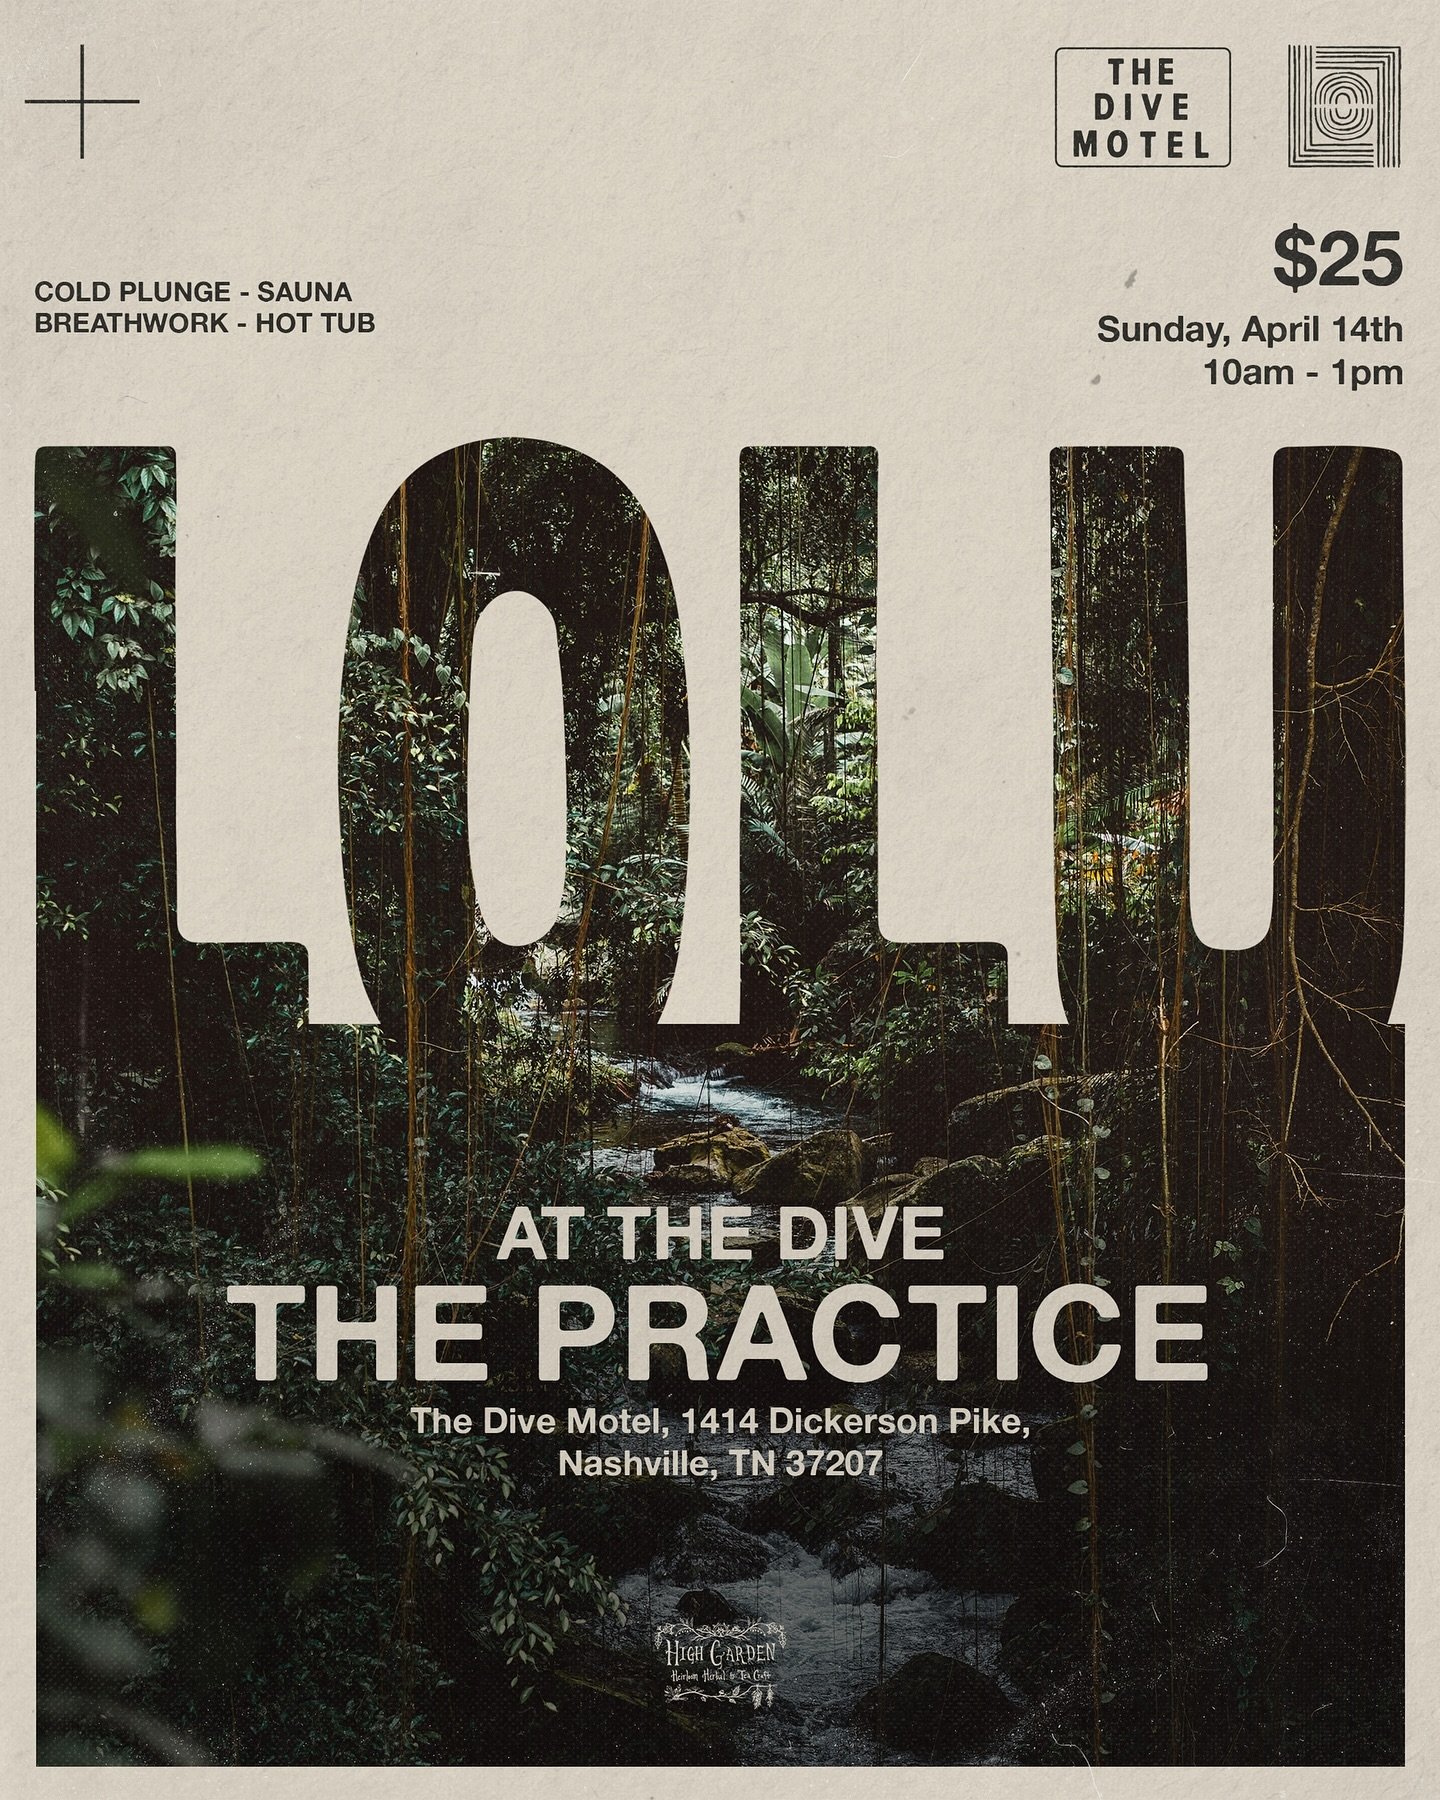 Stay locked in 🧊 Join us this Sunday for YOUR practice! Breathwork, cold plunge, and community. Hot teas by @highgardentea and breakfast snacks for all attendees. Sign up on Mindbody or at the link in bio! 
.
.
.
Poster: @danespearman @sickdesignco 